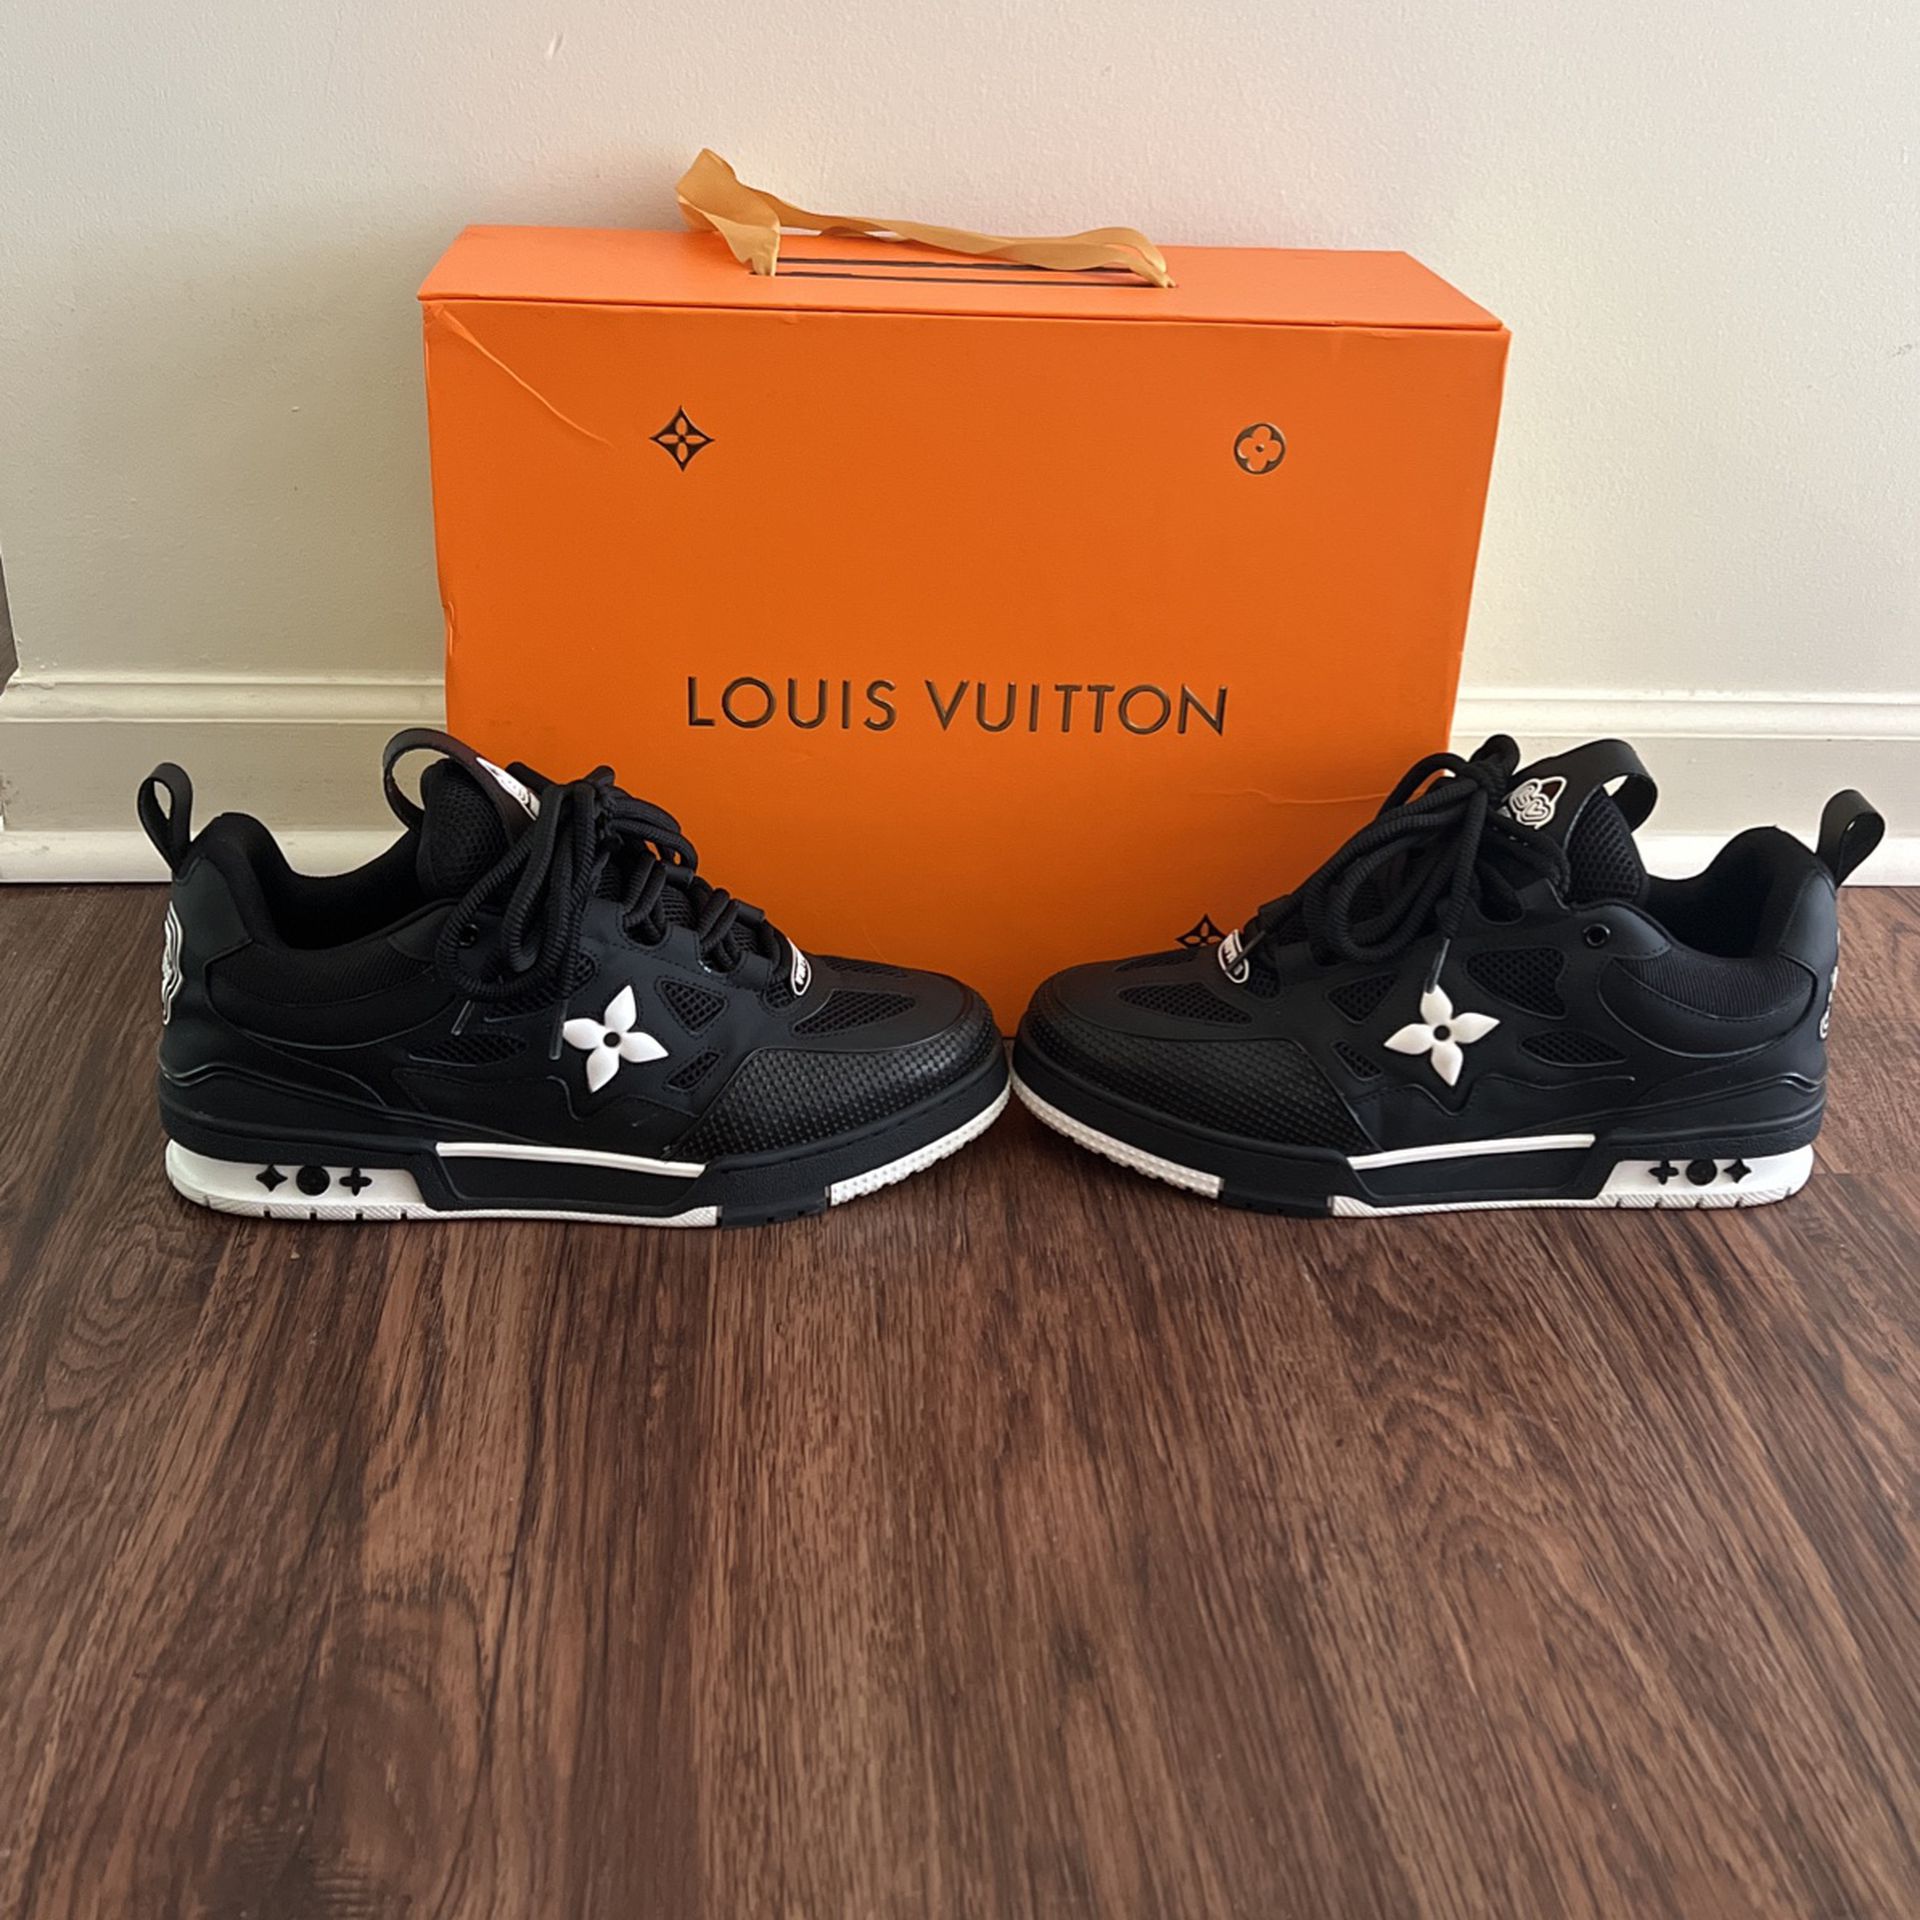 LV Skates for Sale in Chicago, IL - OfferUp